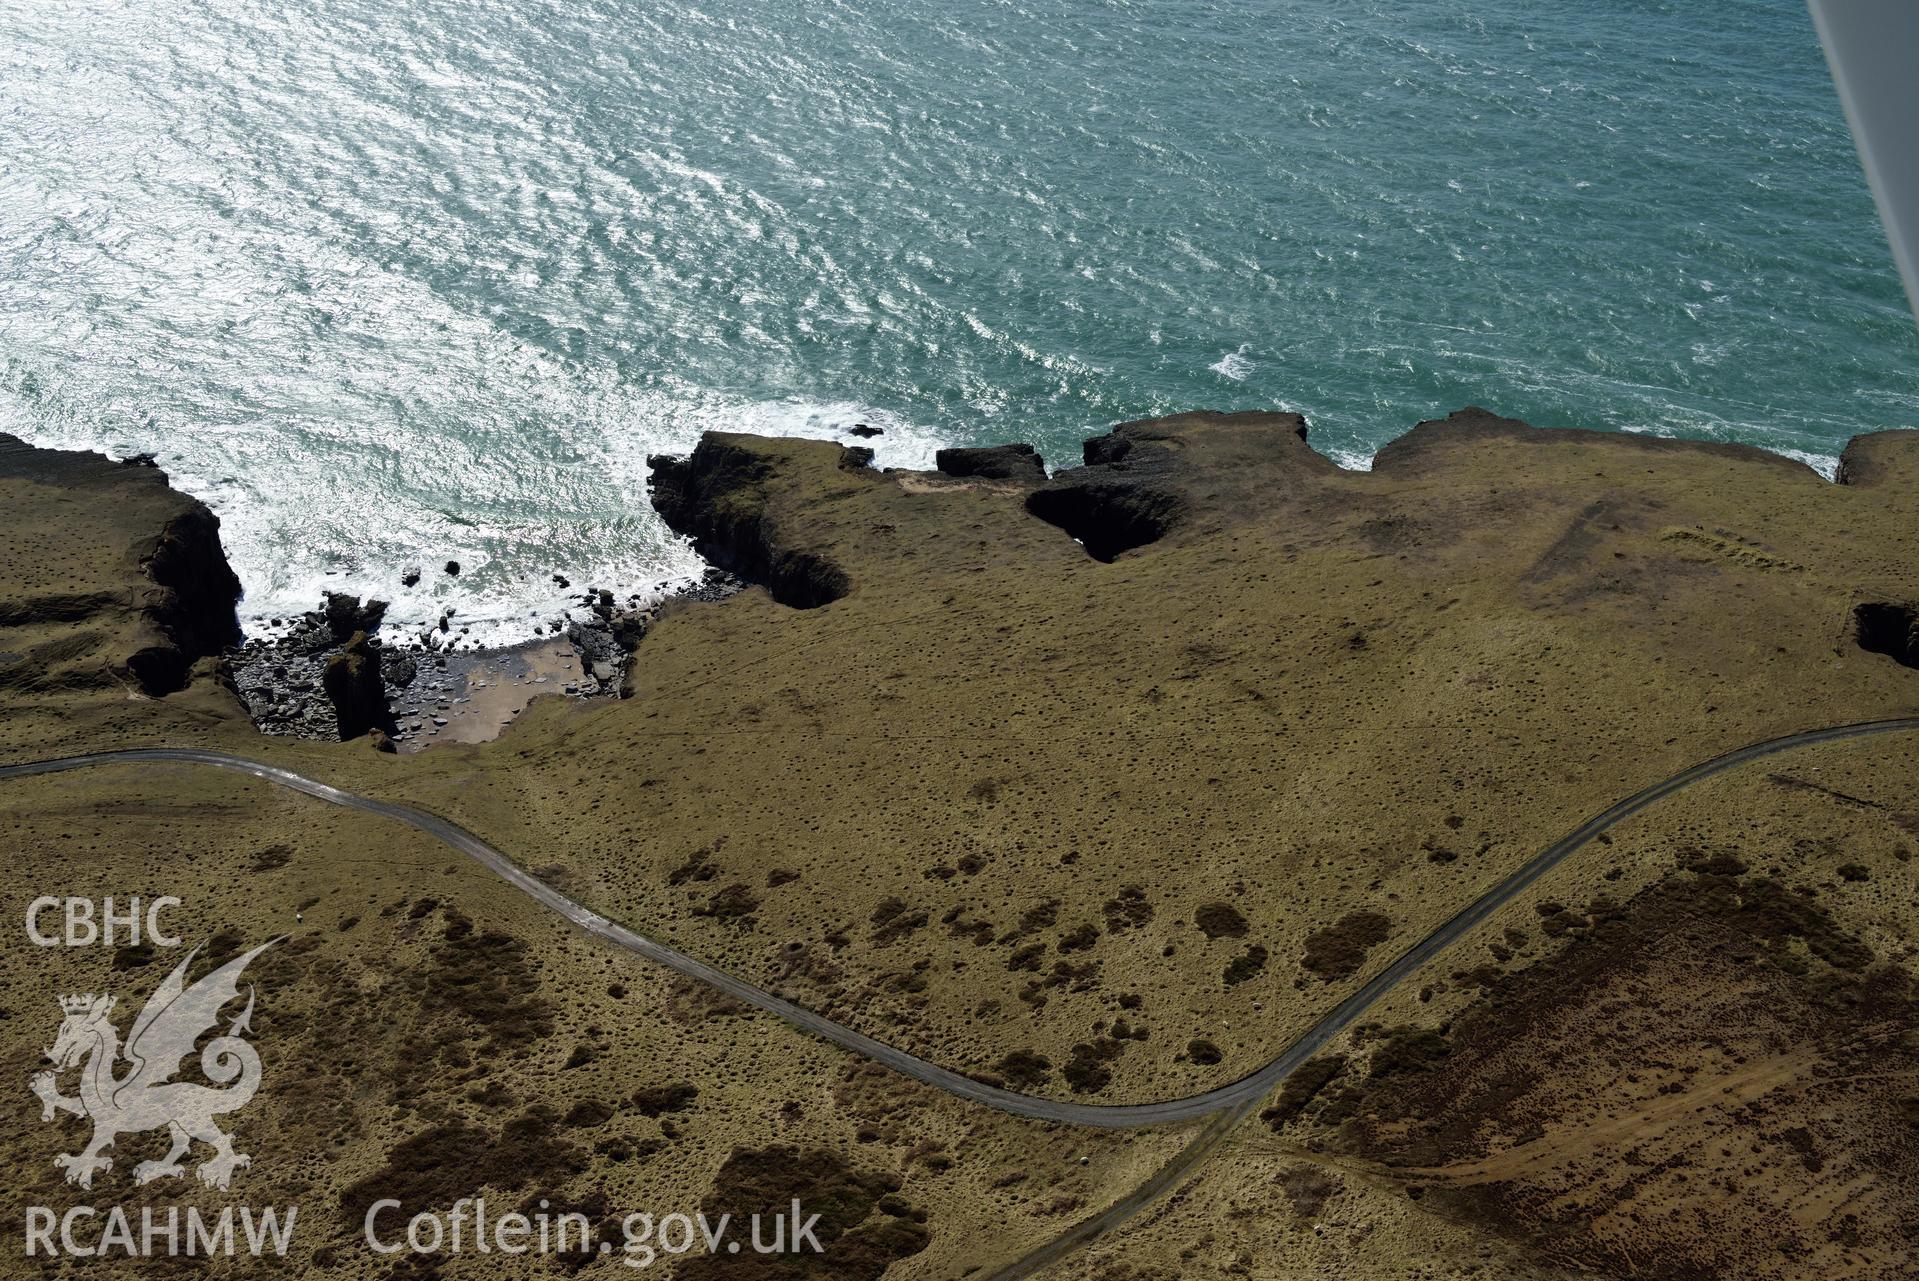 Linney Head enclosure. Baseline aerial reconnaissance survey for the CHERISH Project. ? Crown: CHERISH PROJECT 2018. Produced with EU funds through the Ireland Wales Co-operation Programme 2014-2020. All material made freely available through the Open Government Licence.